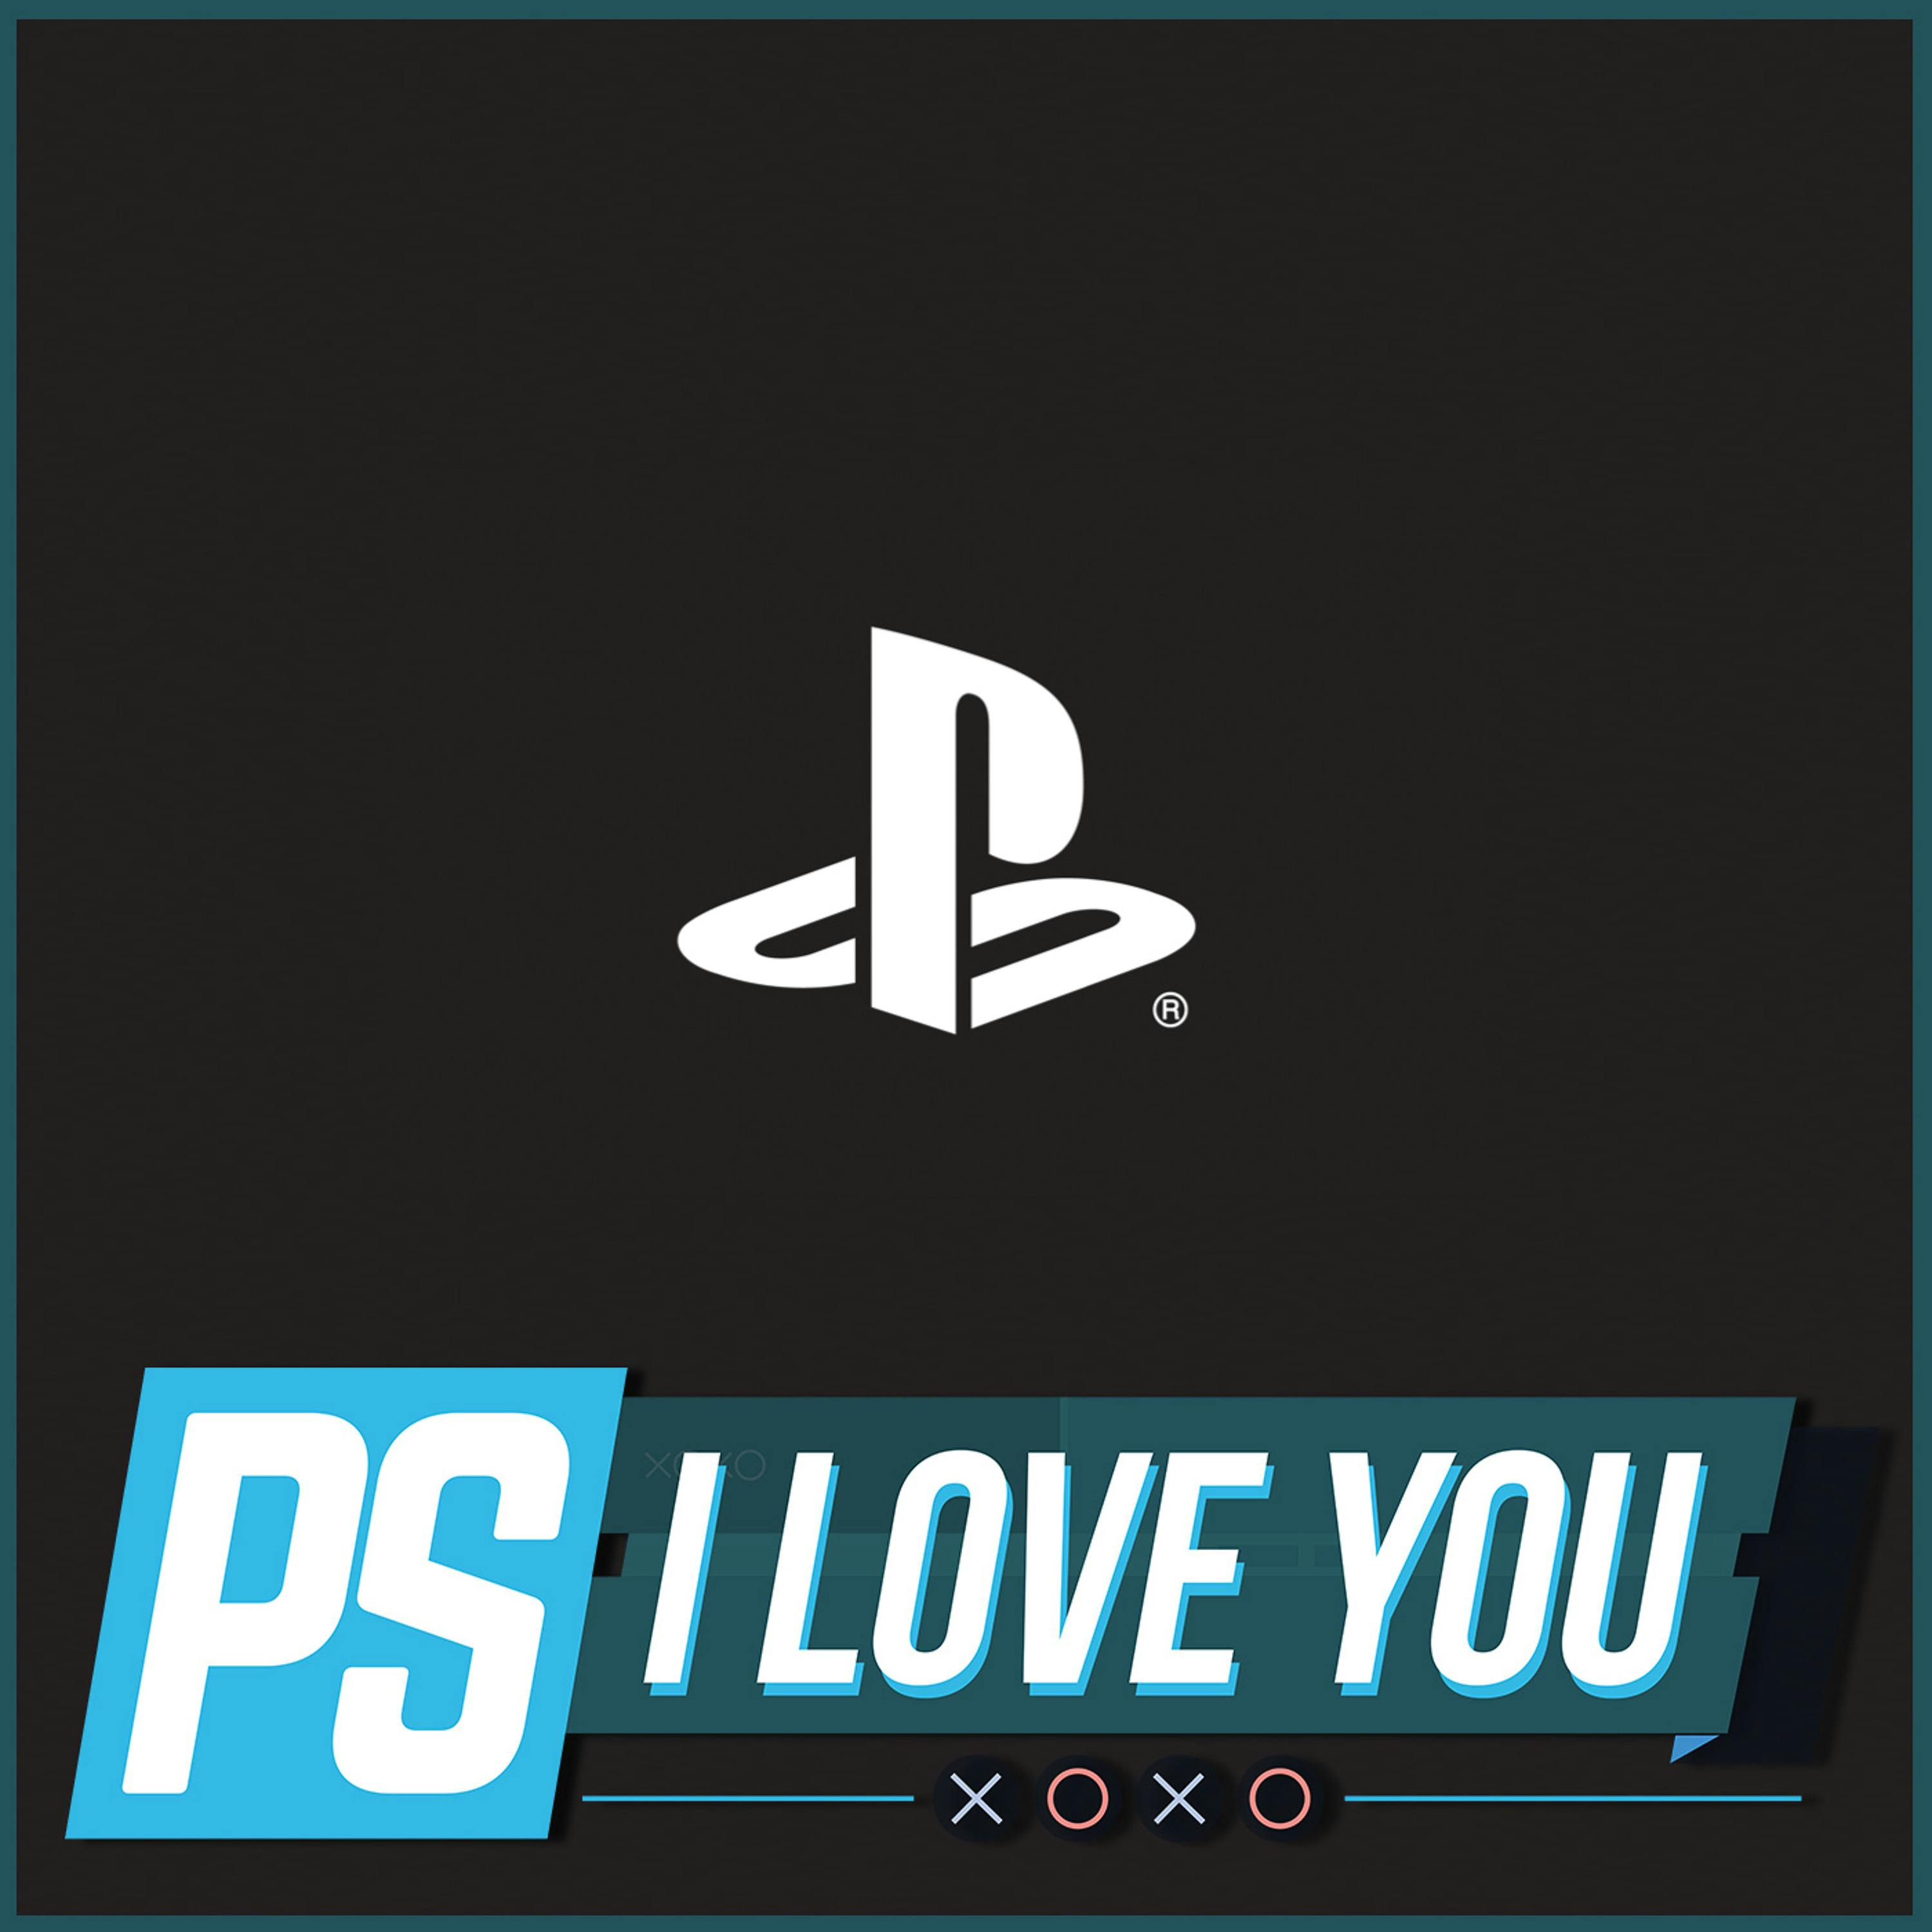 The Final PS I Love You XOXO